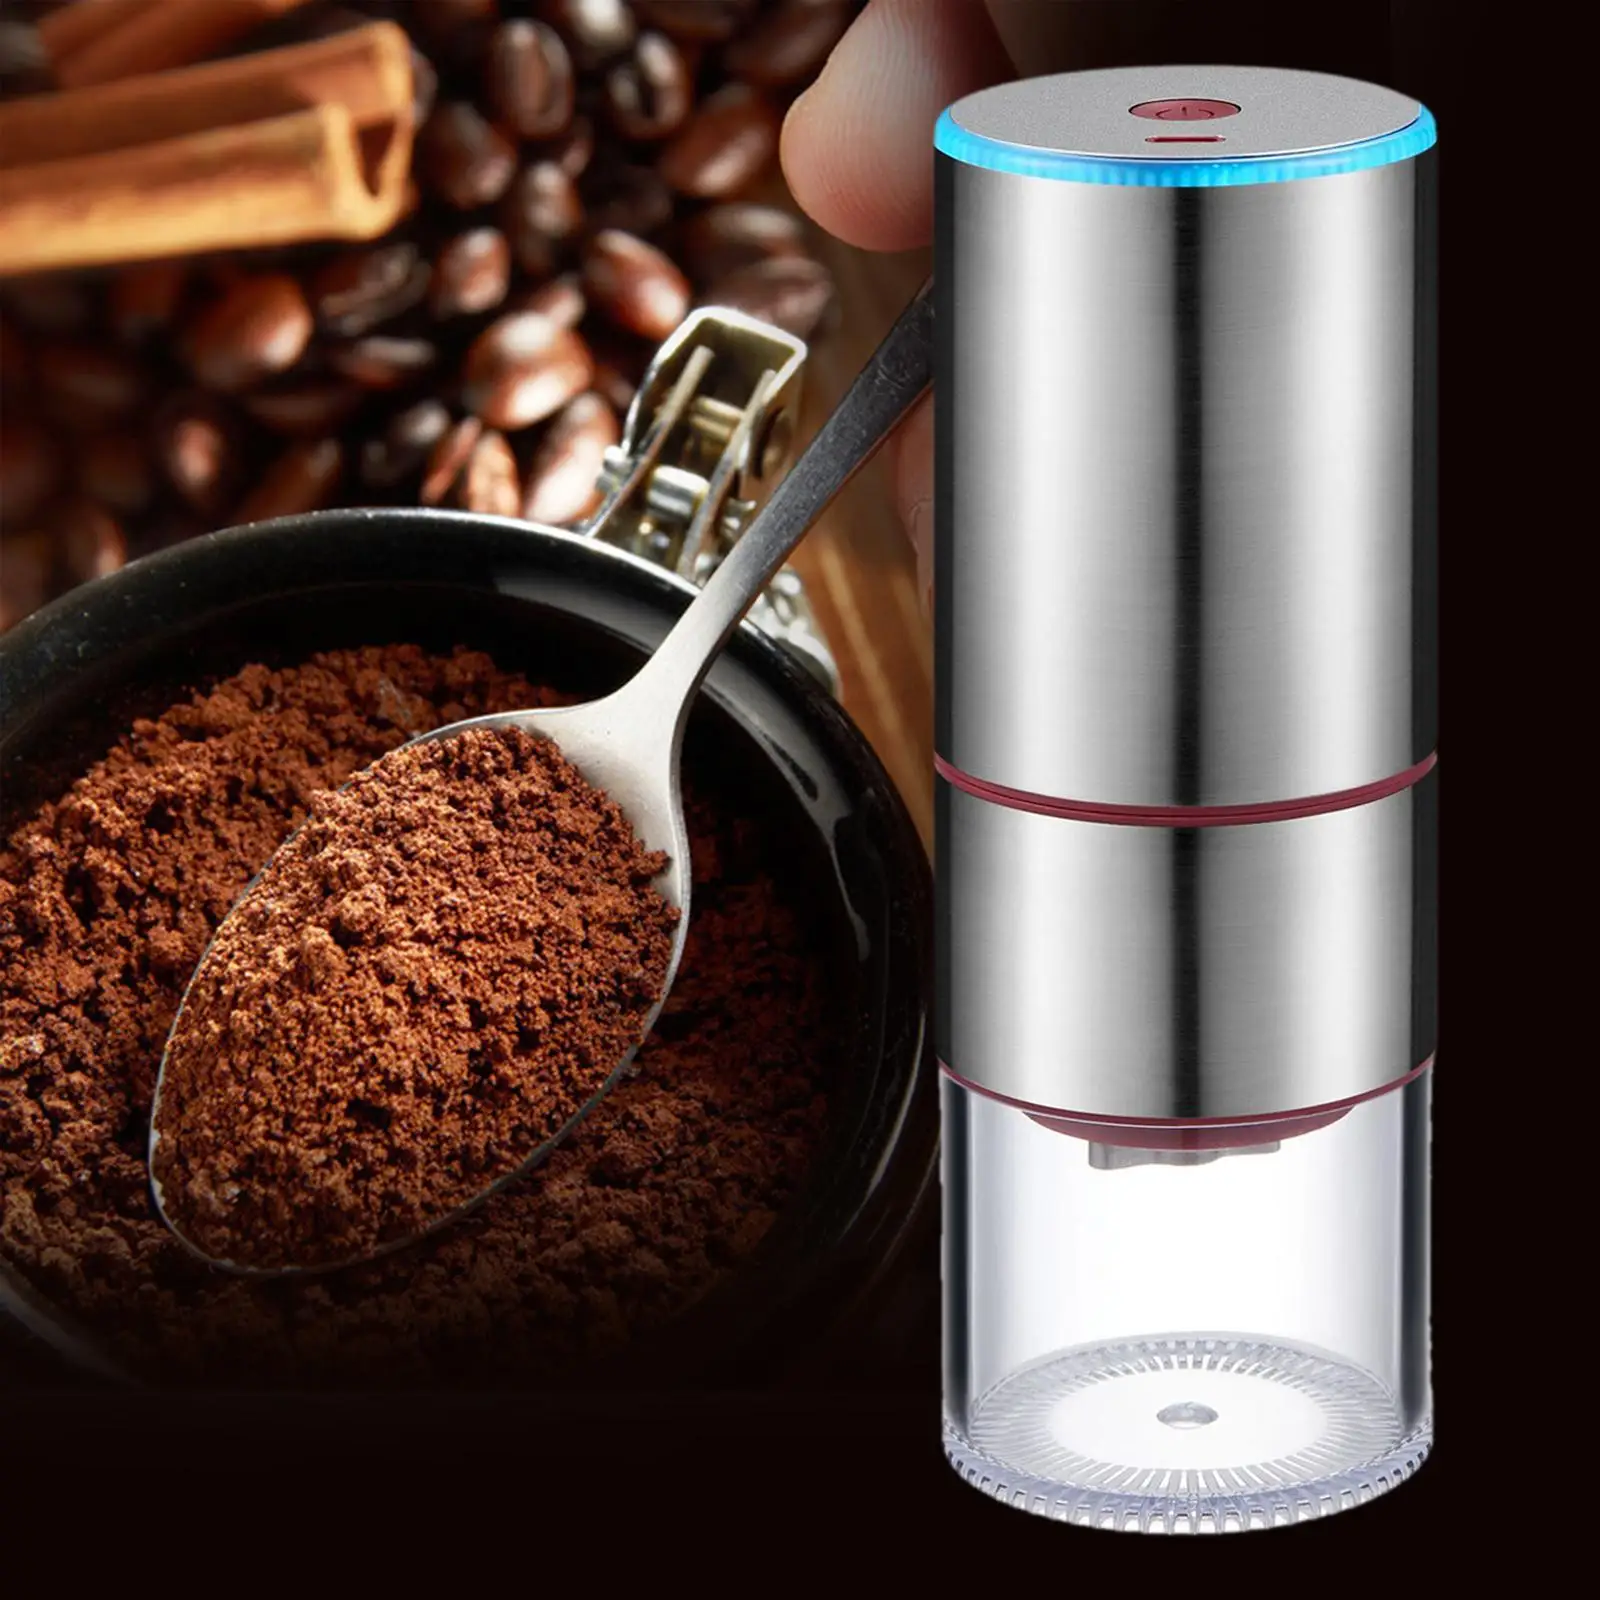 Portable Electric Coffee Grinder Bean Grinding Burr Mill Stainless Steel Whole Bean Burr Coffee Grinding for Espresso Macchiato